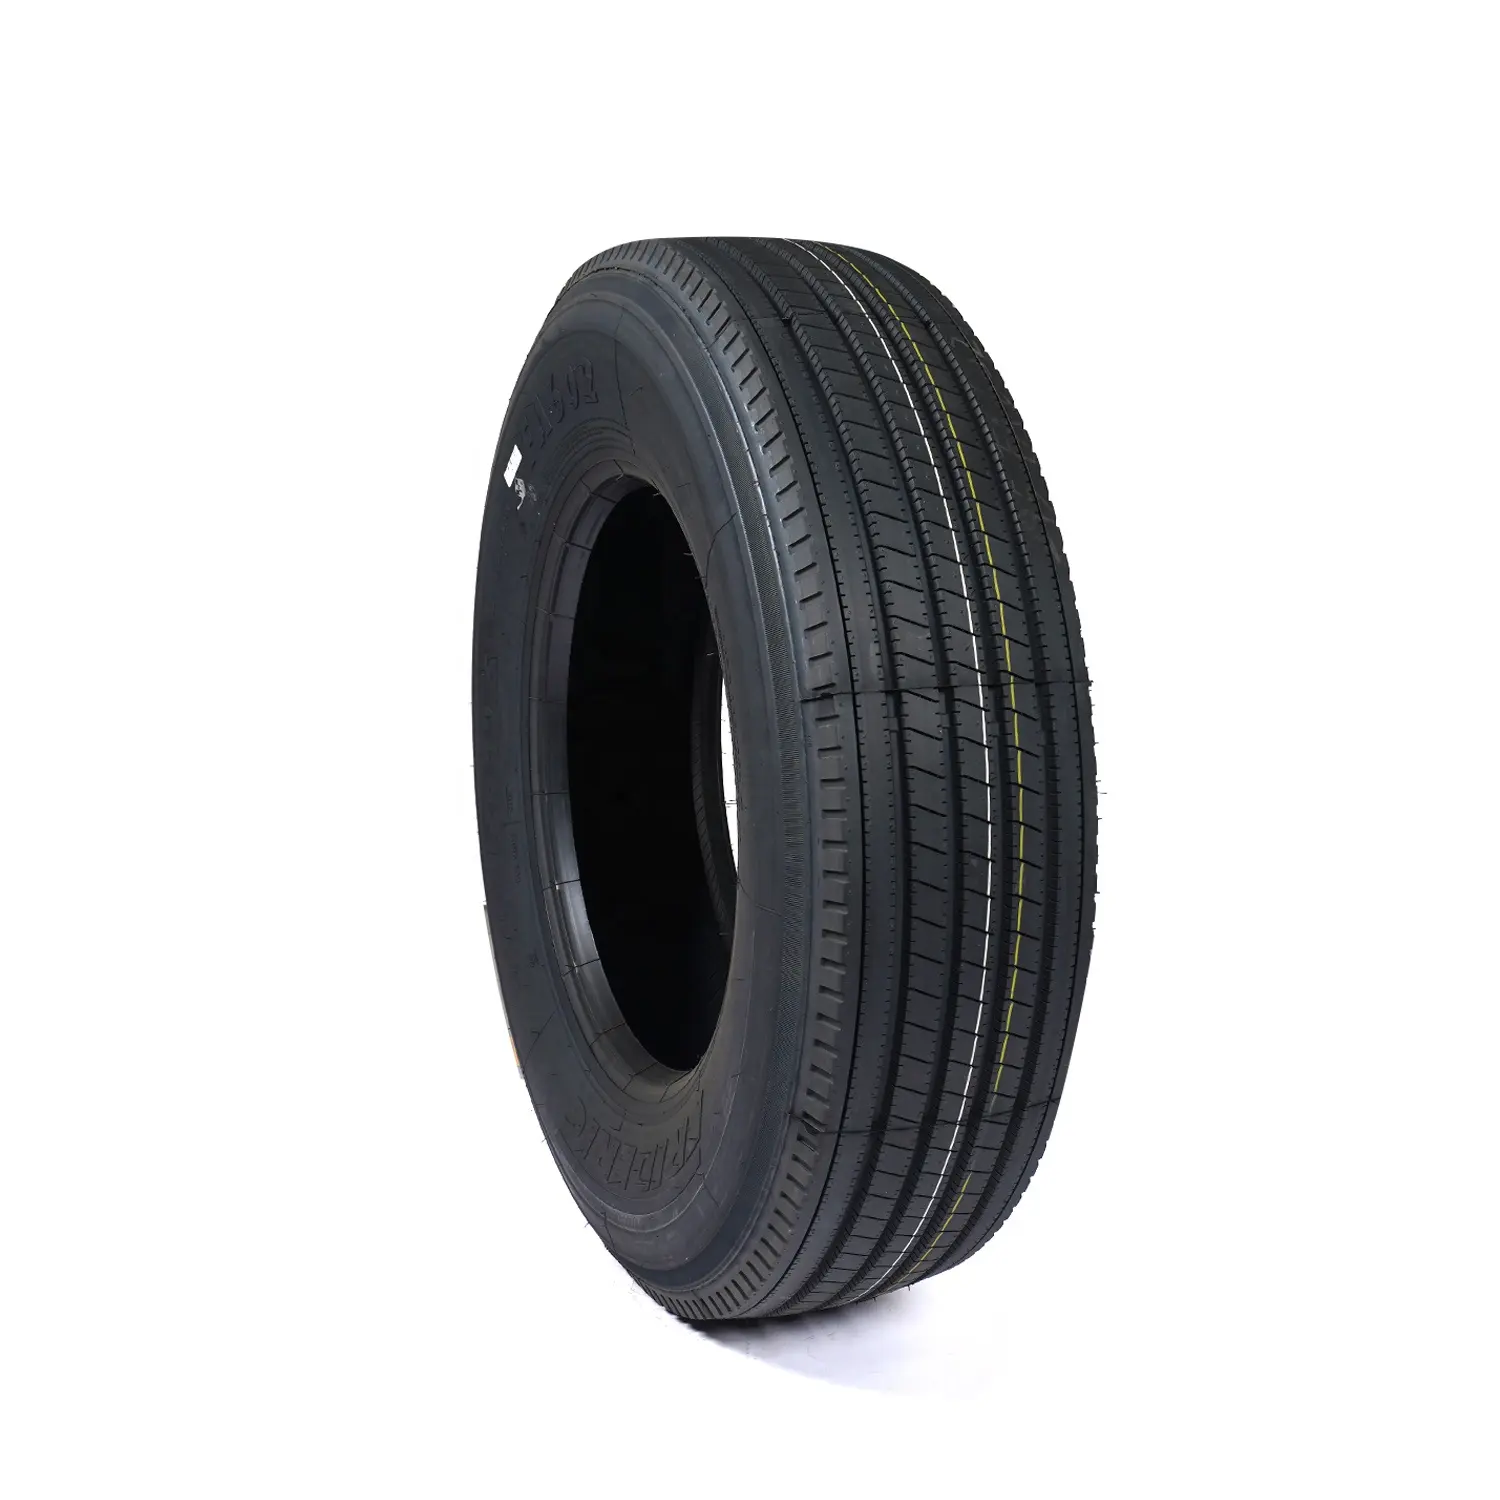 Chinese Manufacturer 295/75r22.5 315/80R22.5 cheap price tyres tire new brand wholesale truck tires